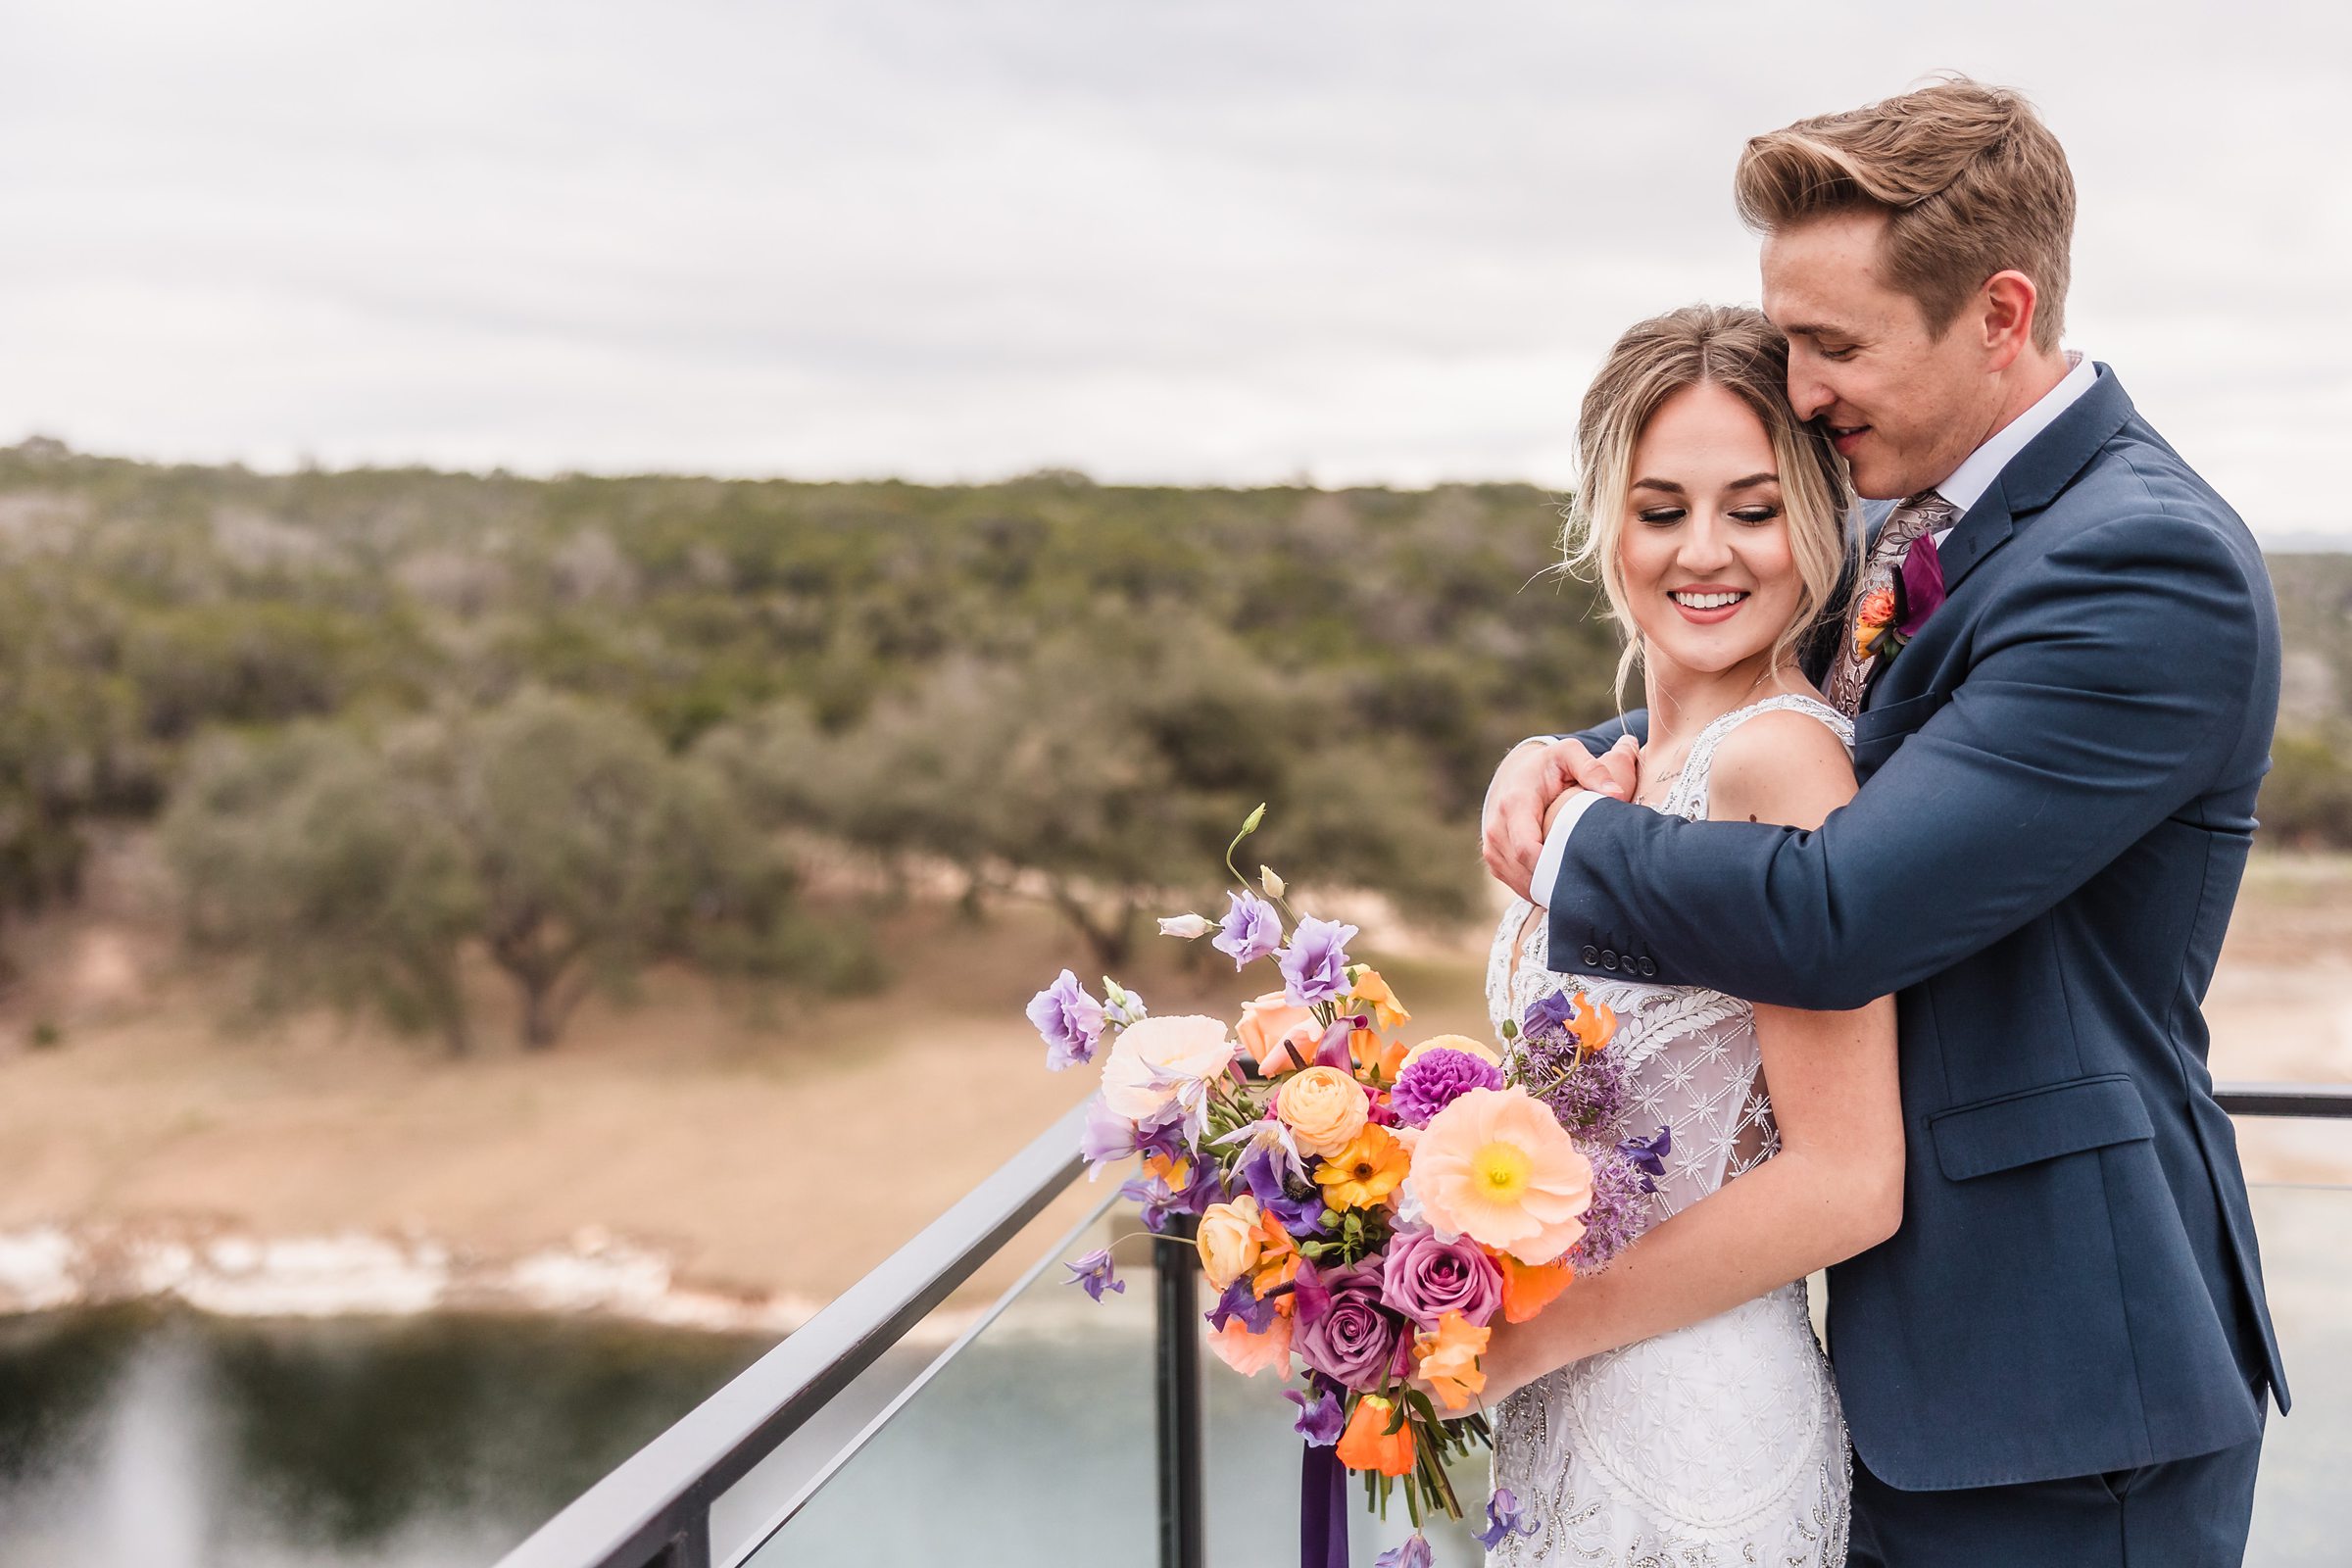 Bride and Groom celebrate their wedding at the Videre Estate venue in Wimberley, Texas.